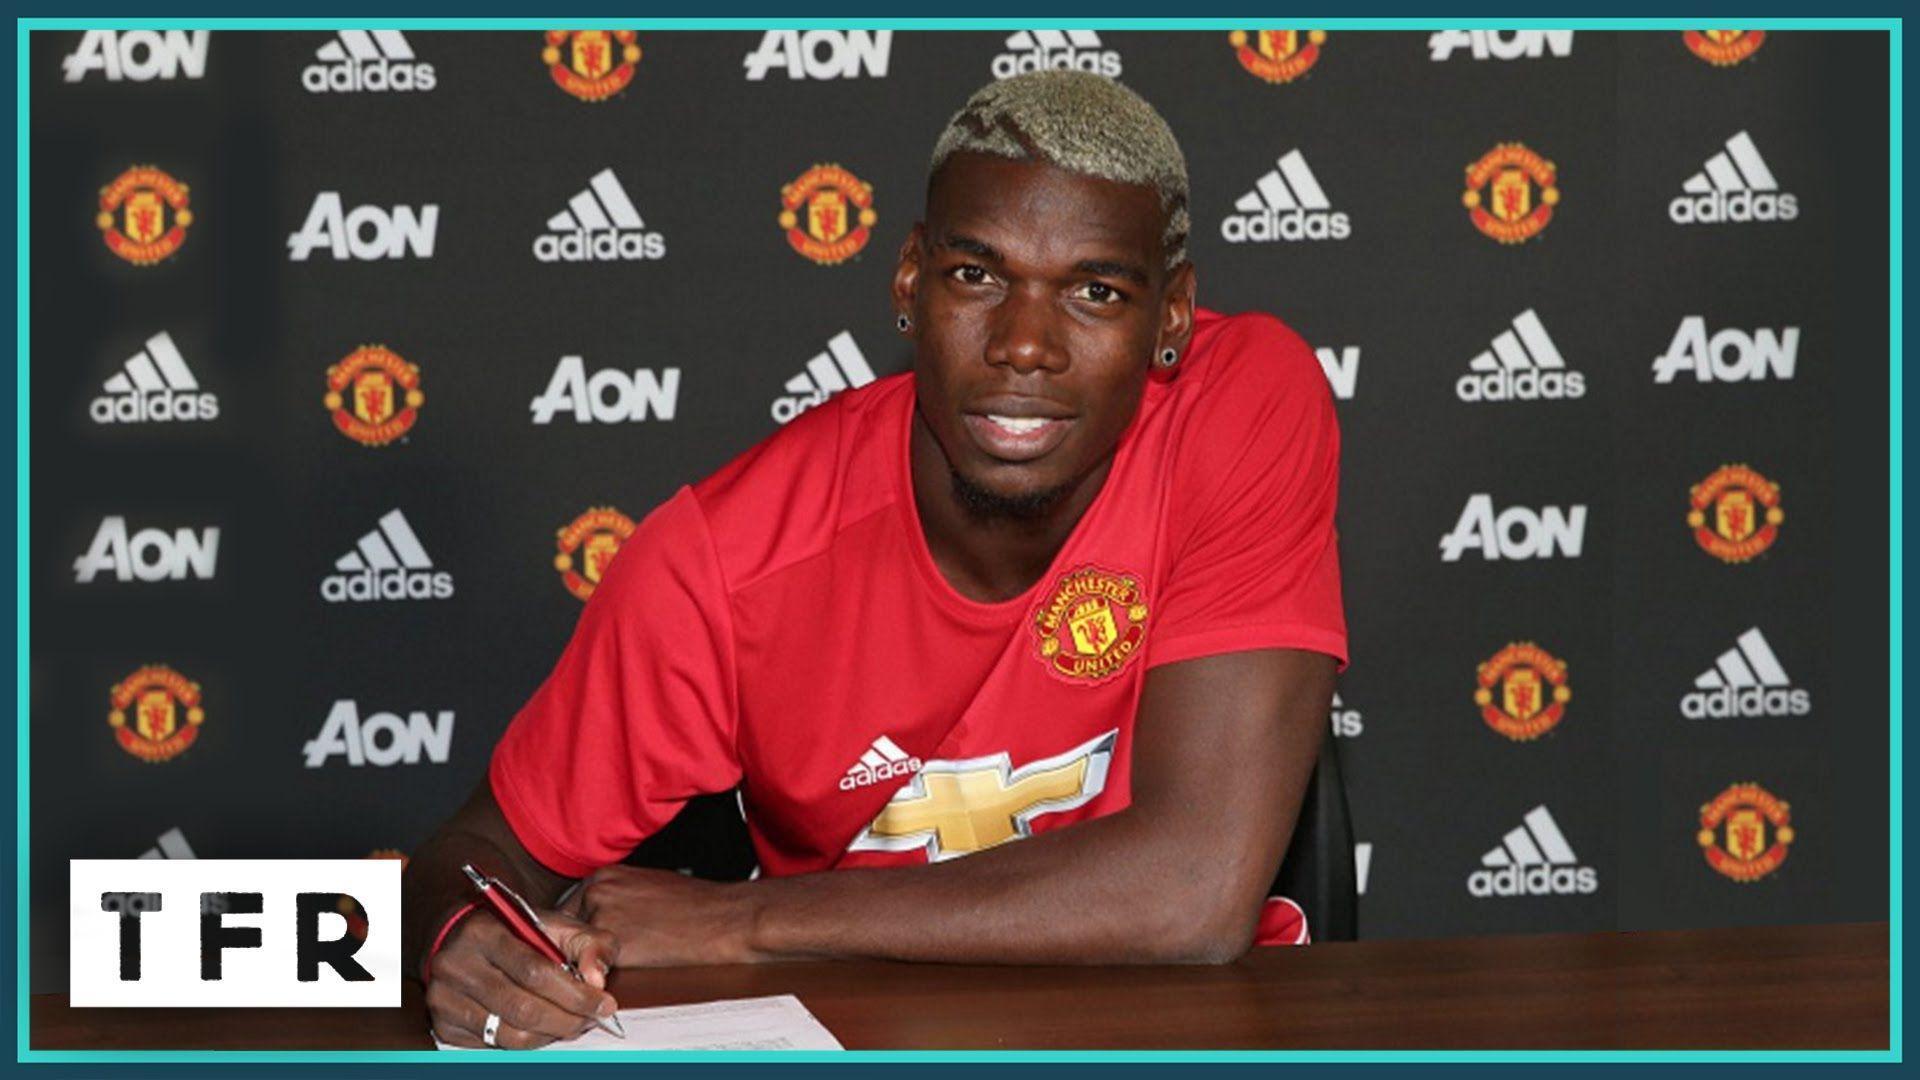 Paul Pogba&;s first Manchester United interview!. PAUL POGBA TO